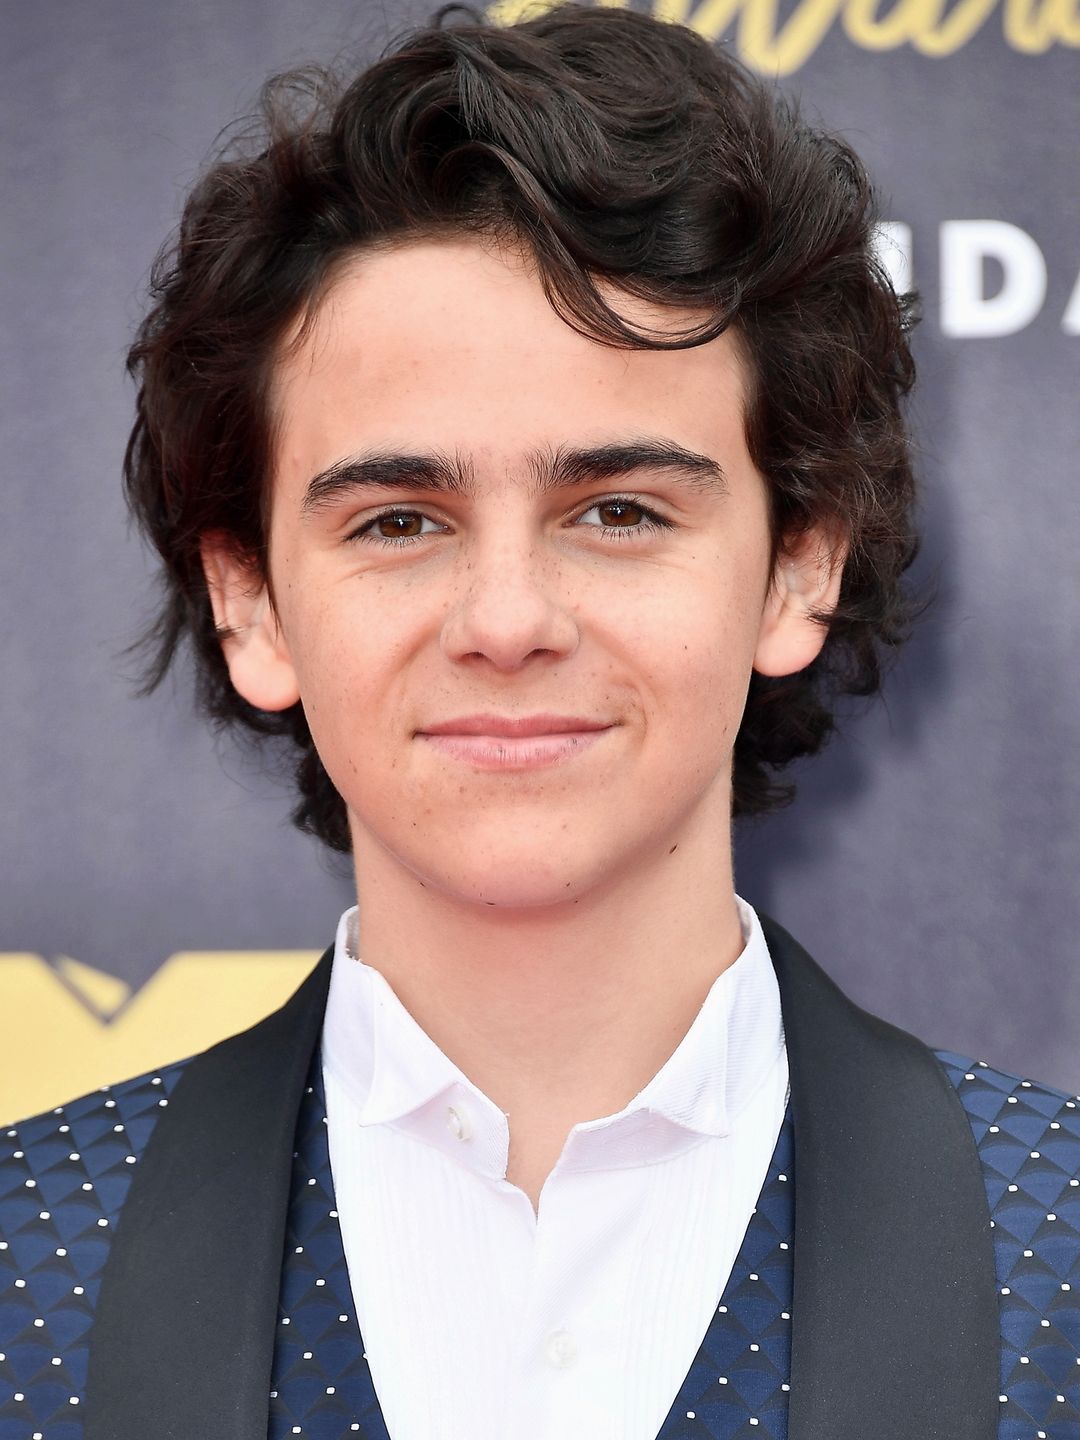 Jack Grazer who is his mother